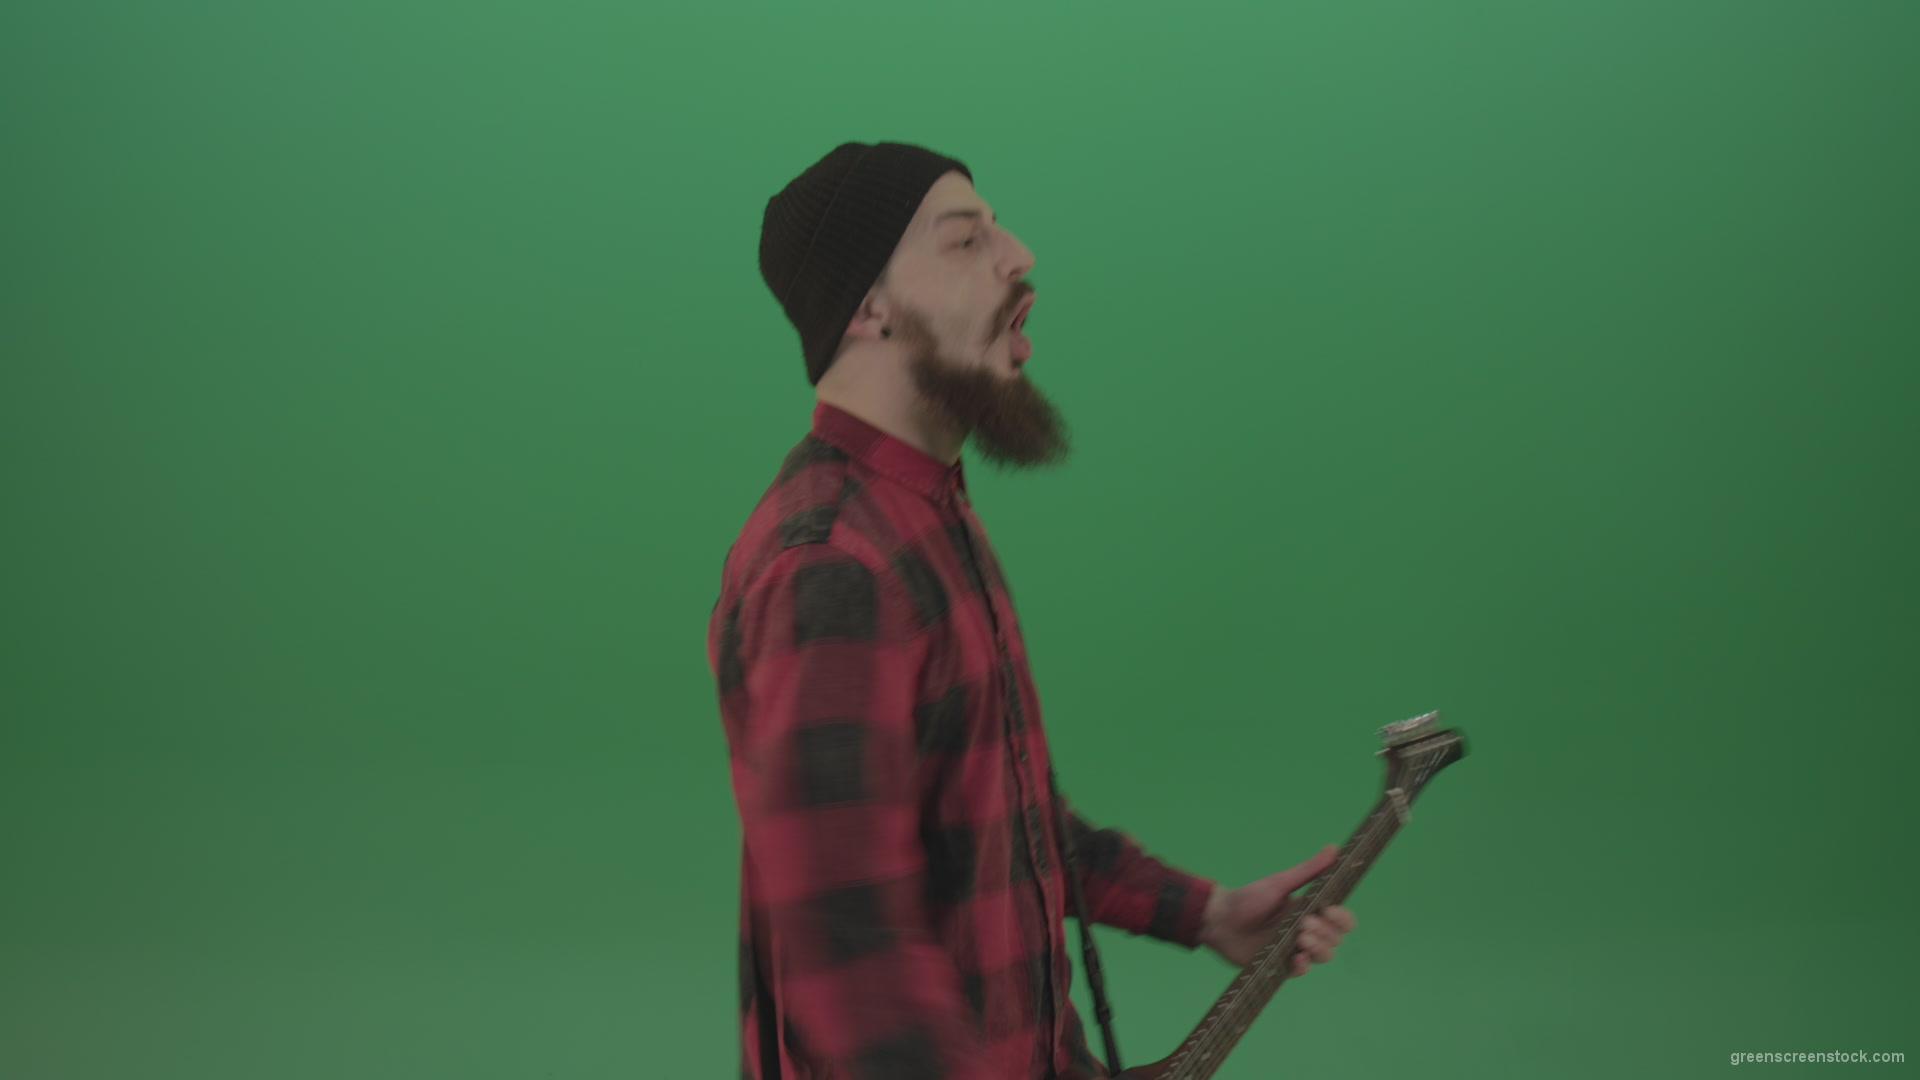 Angry-punk-rock-man-guitarist-play-guitar-and-scream-death-hardcore-music-isolated-on-green-screen_006 Green Screen Stock